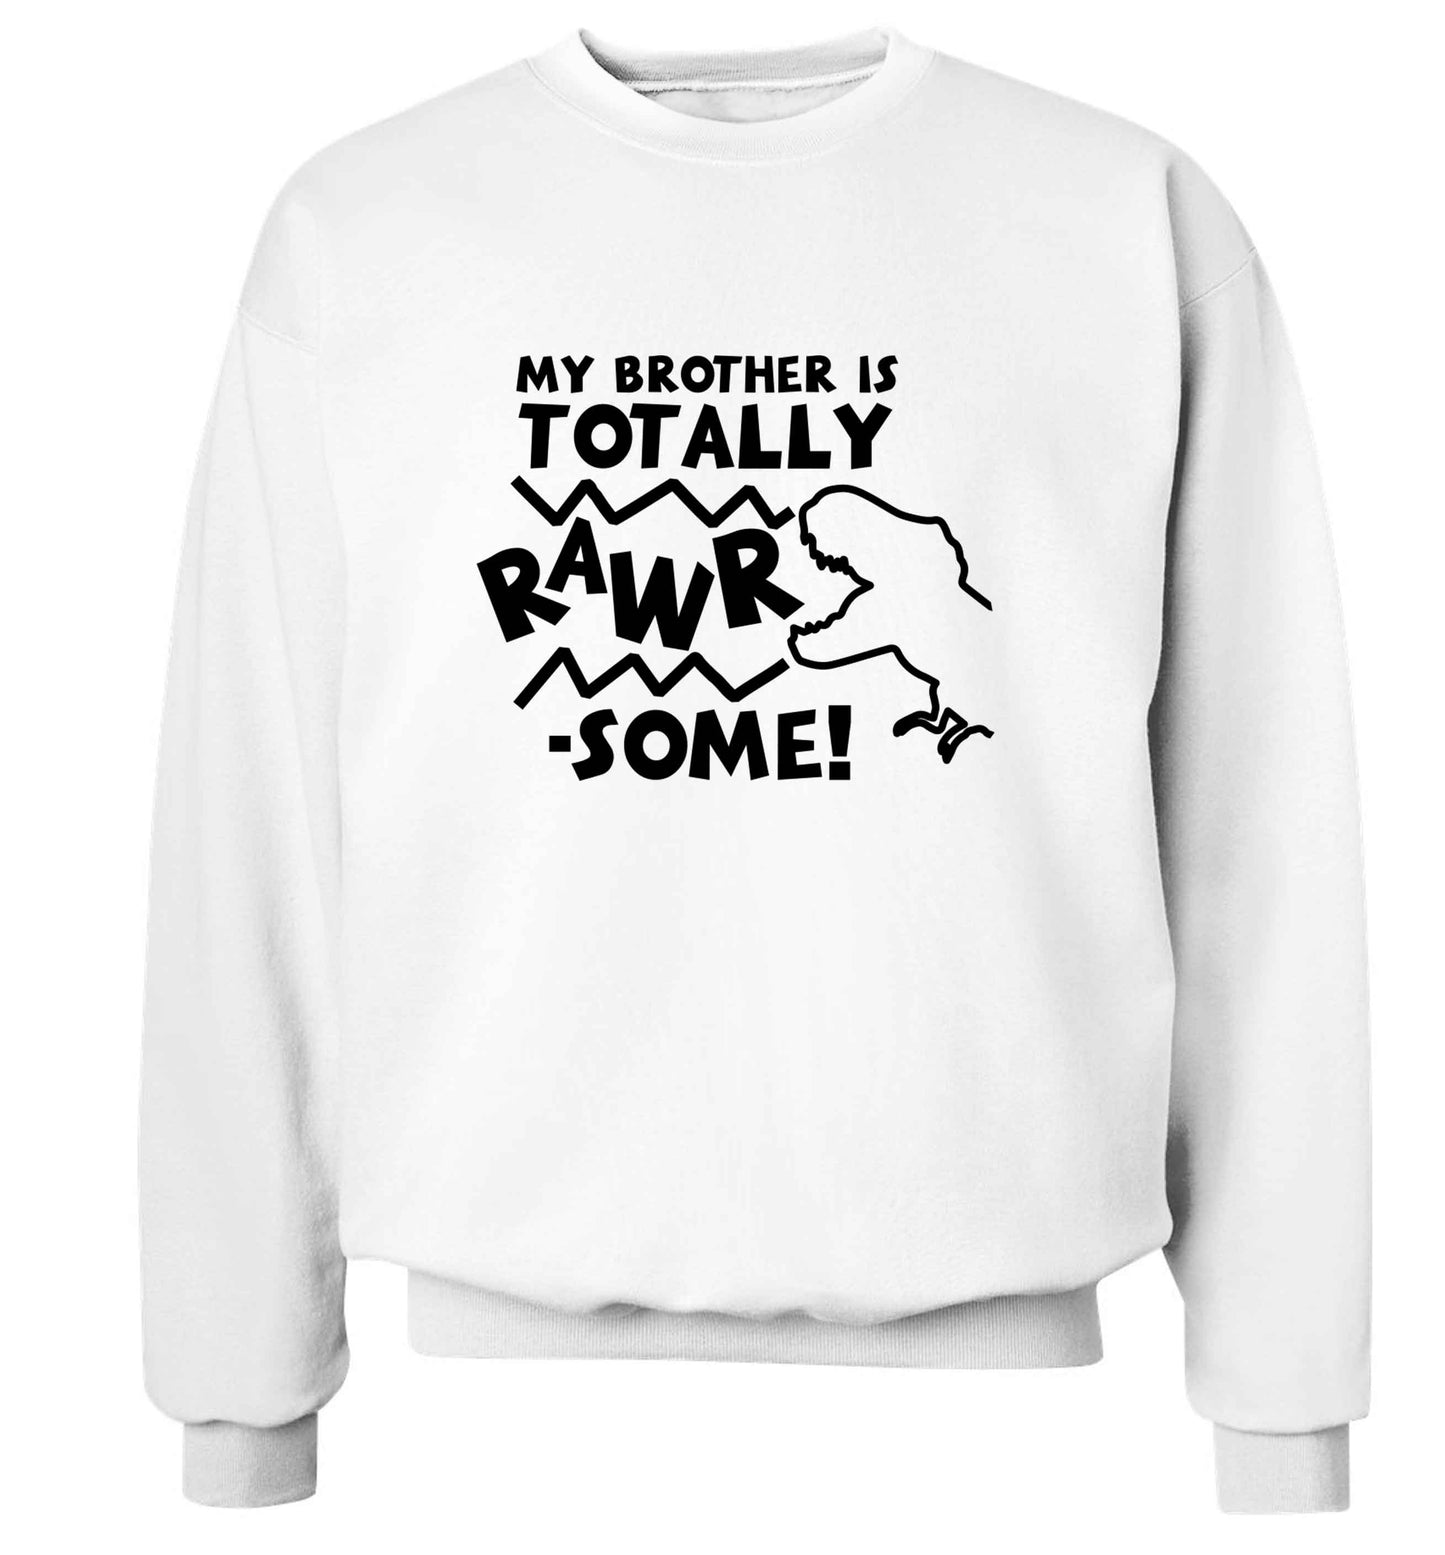 My brother is totally rawrsome adult's unisex white sweater 2XL